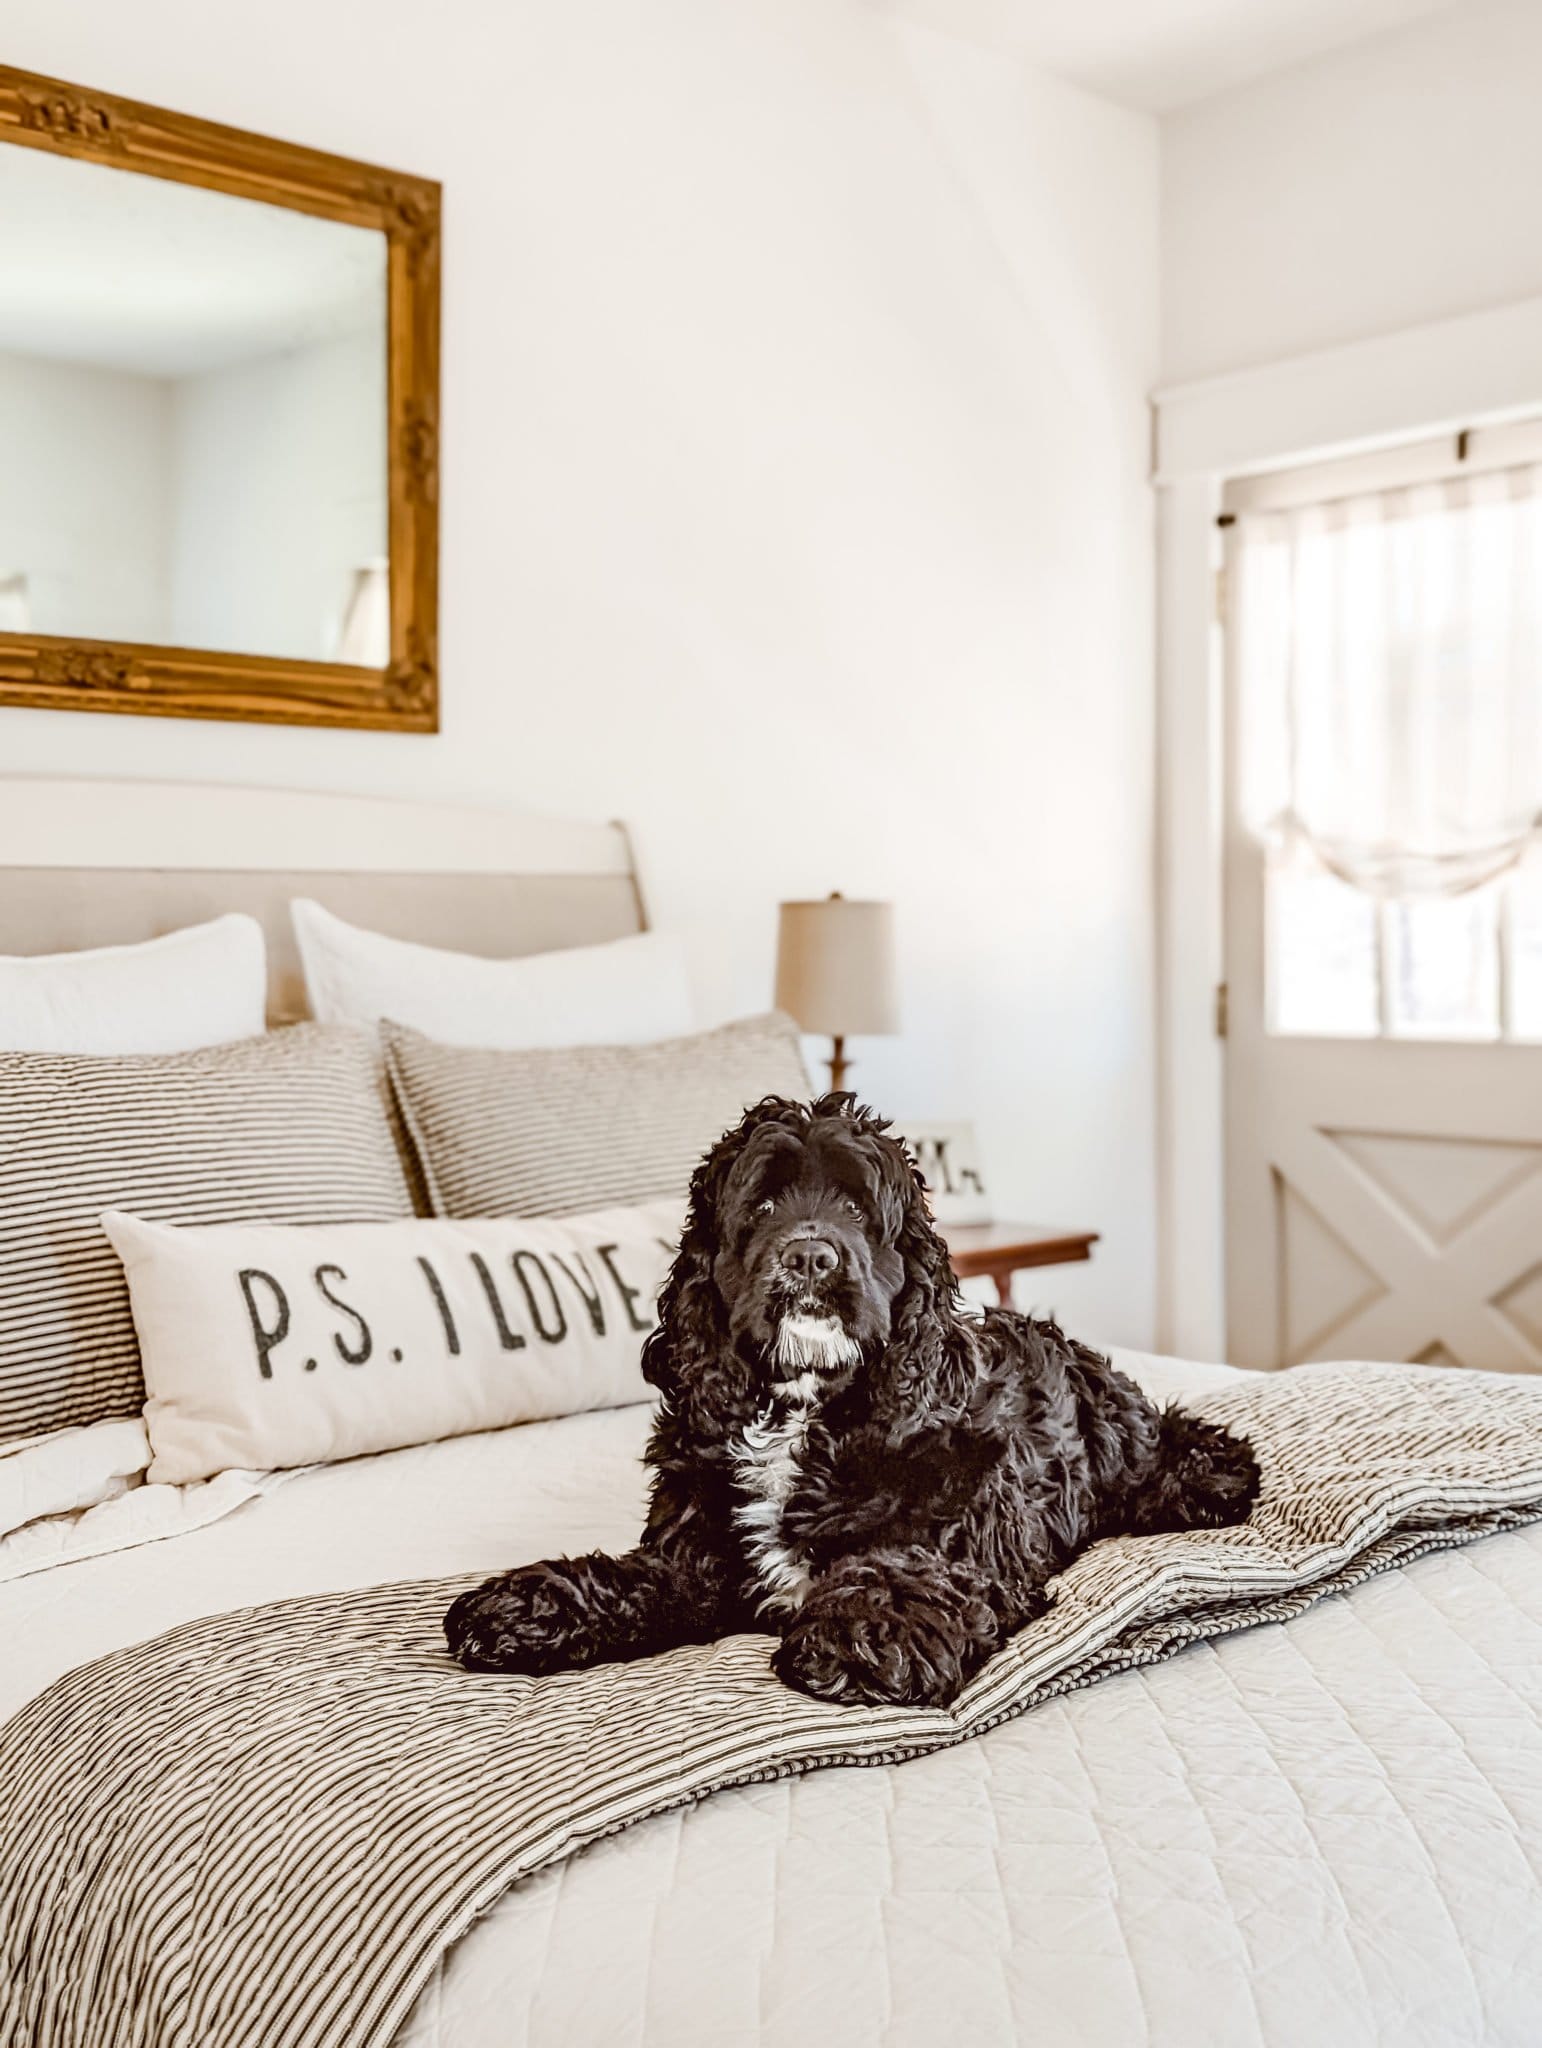 Ford, our cocker spaniel, lounging on the new Red Land Cotton bedding